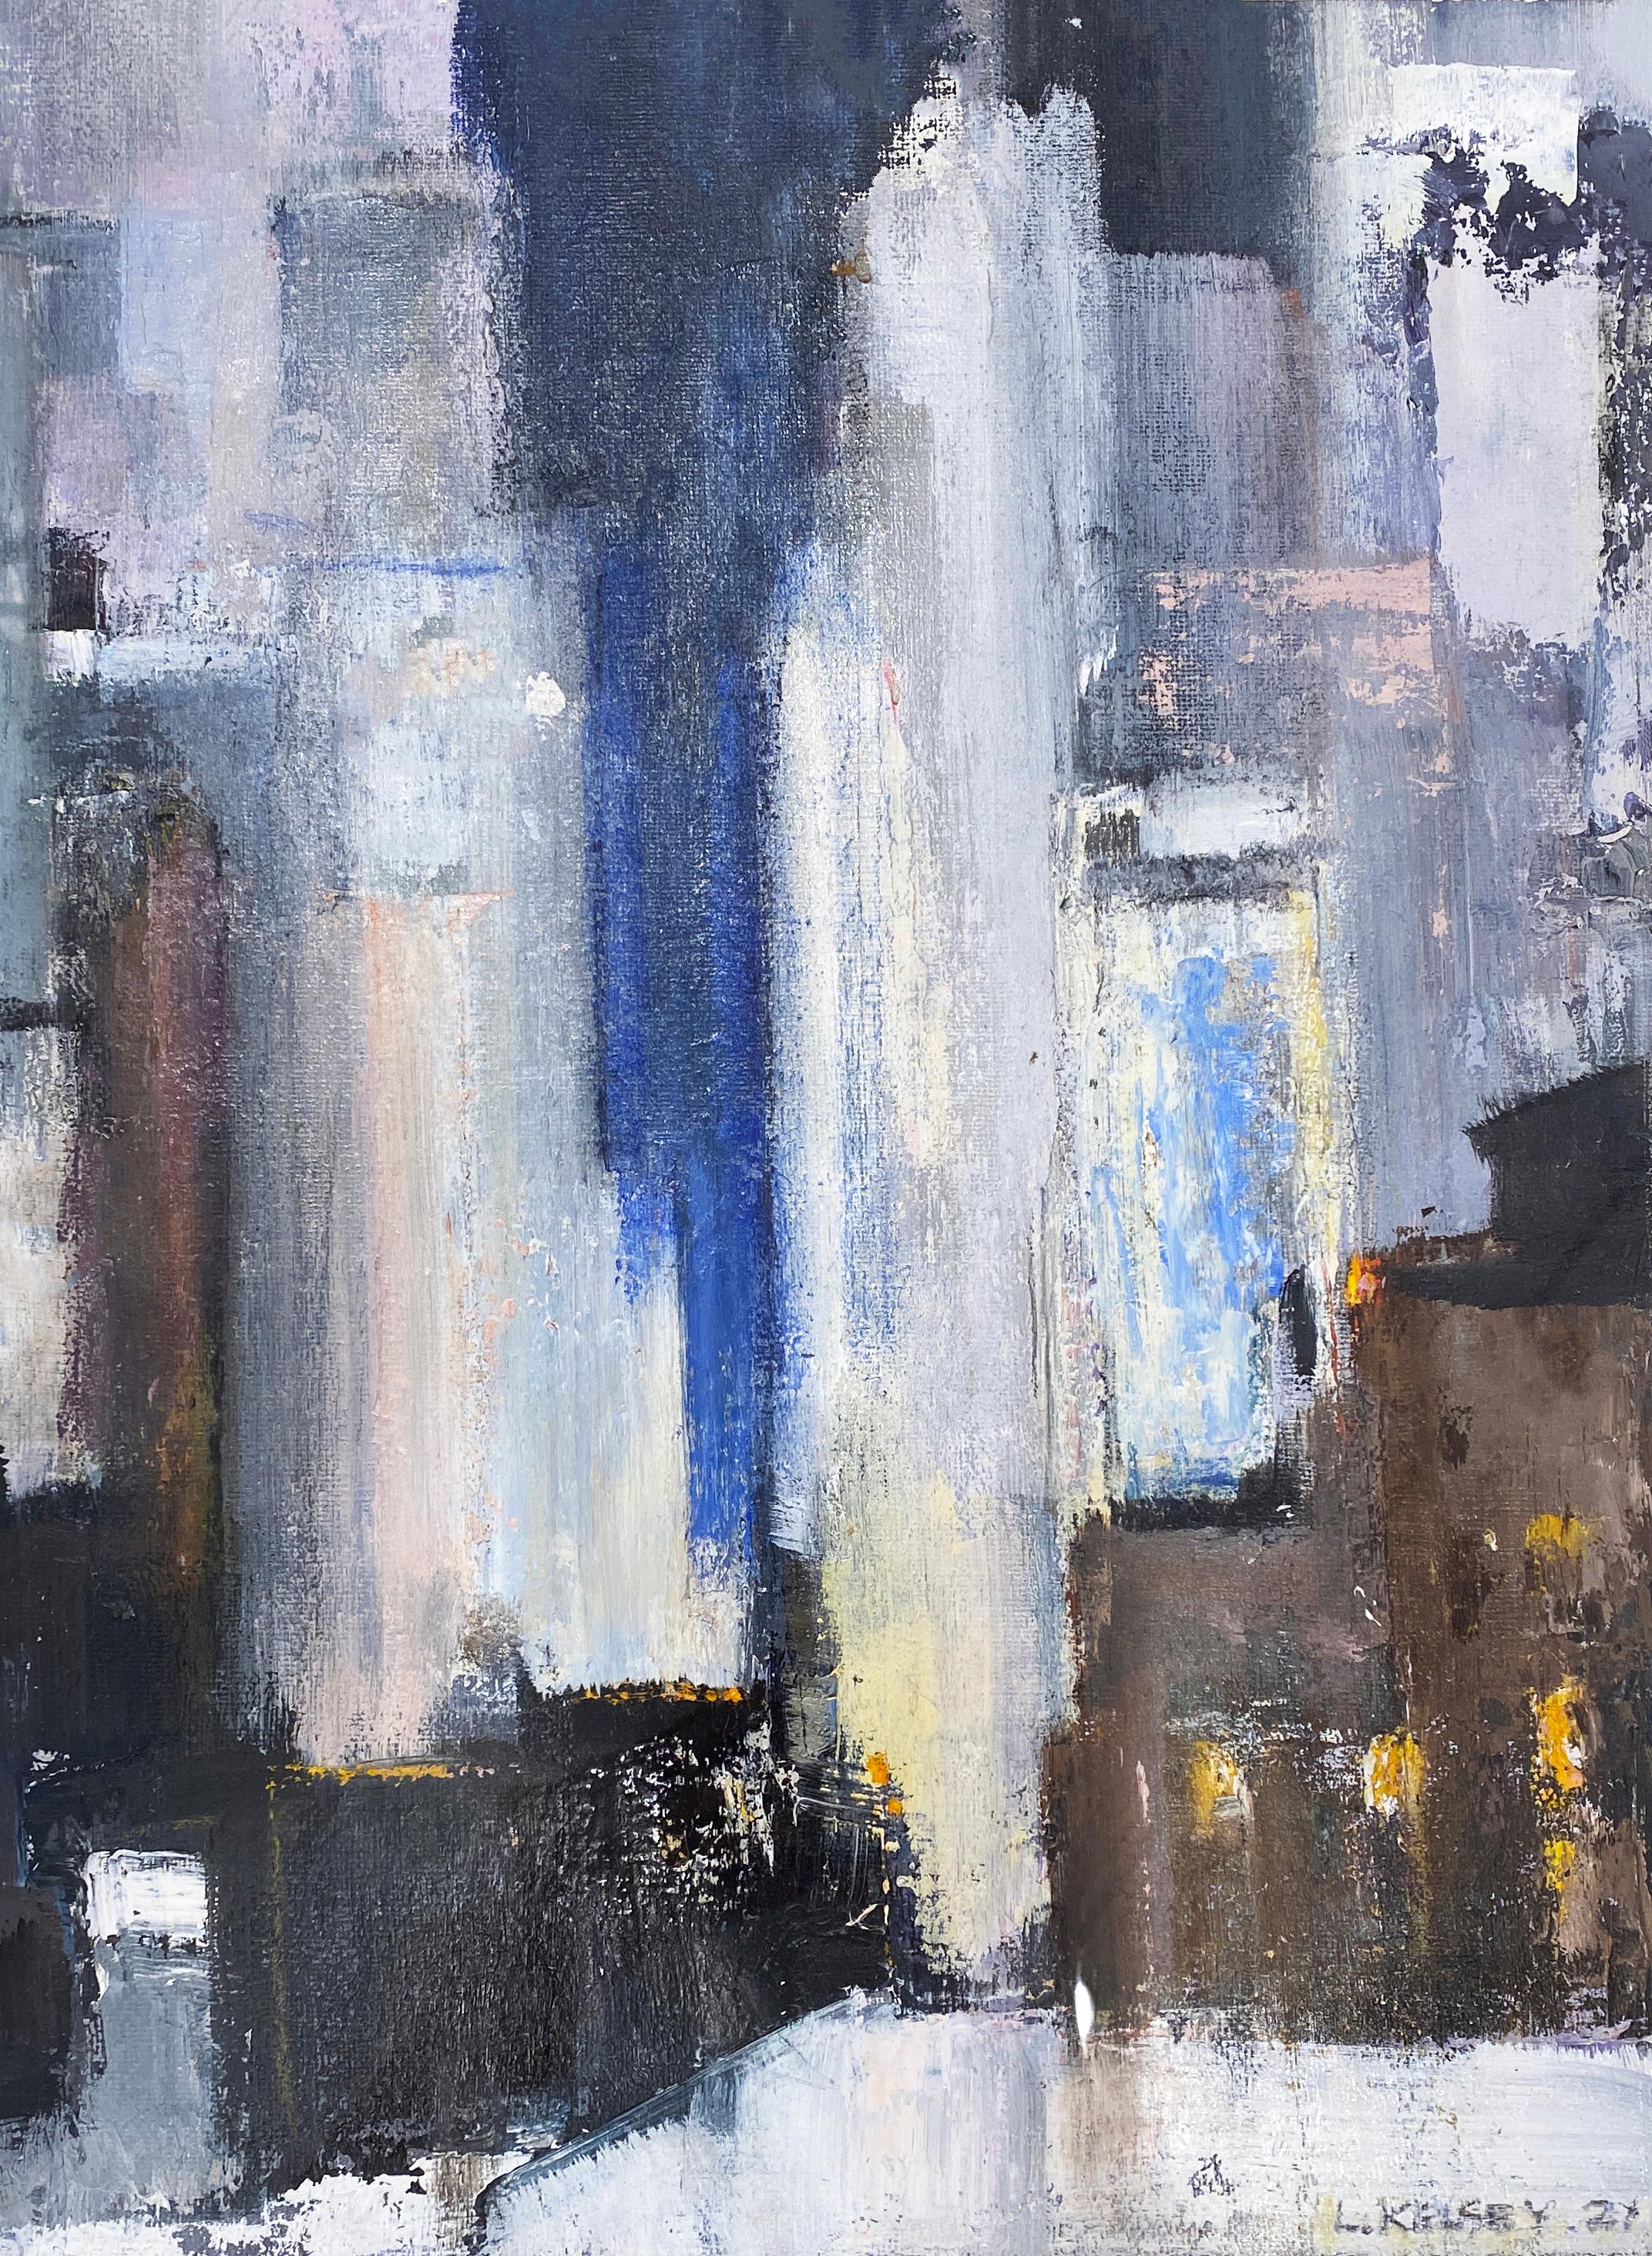 'City At Night' 2021 by American artist, Lawrence Kelsey. Oil on canvas, 14.5 x 11 in. / Frame: 20 x 16 in. Depicting a night view of New York City, this impressionistic painting incorporates rich colors of blue, light blue, black, yellow, and